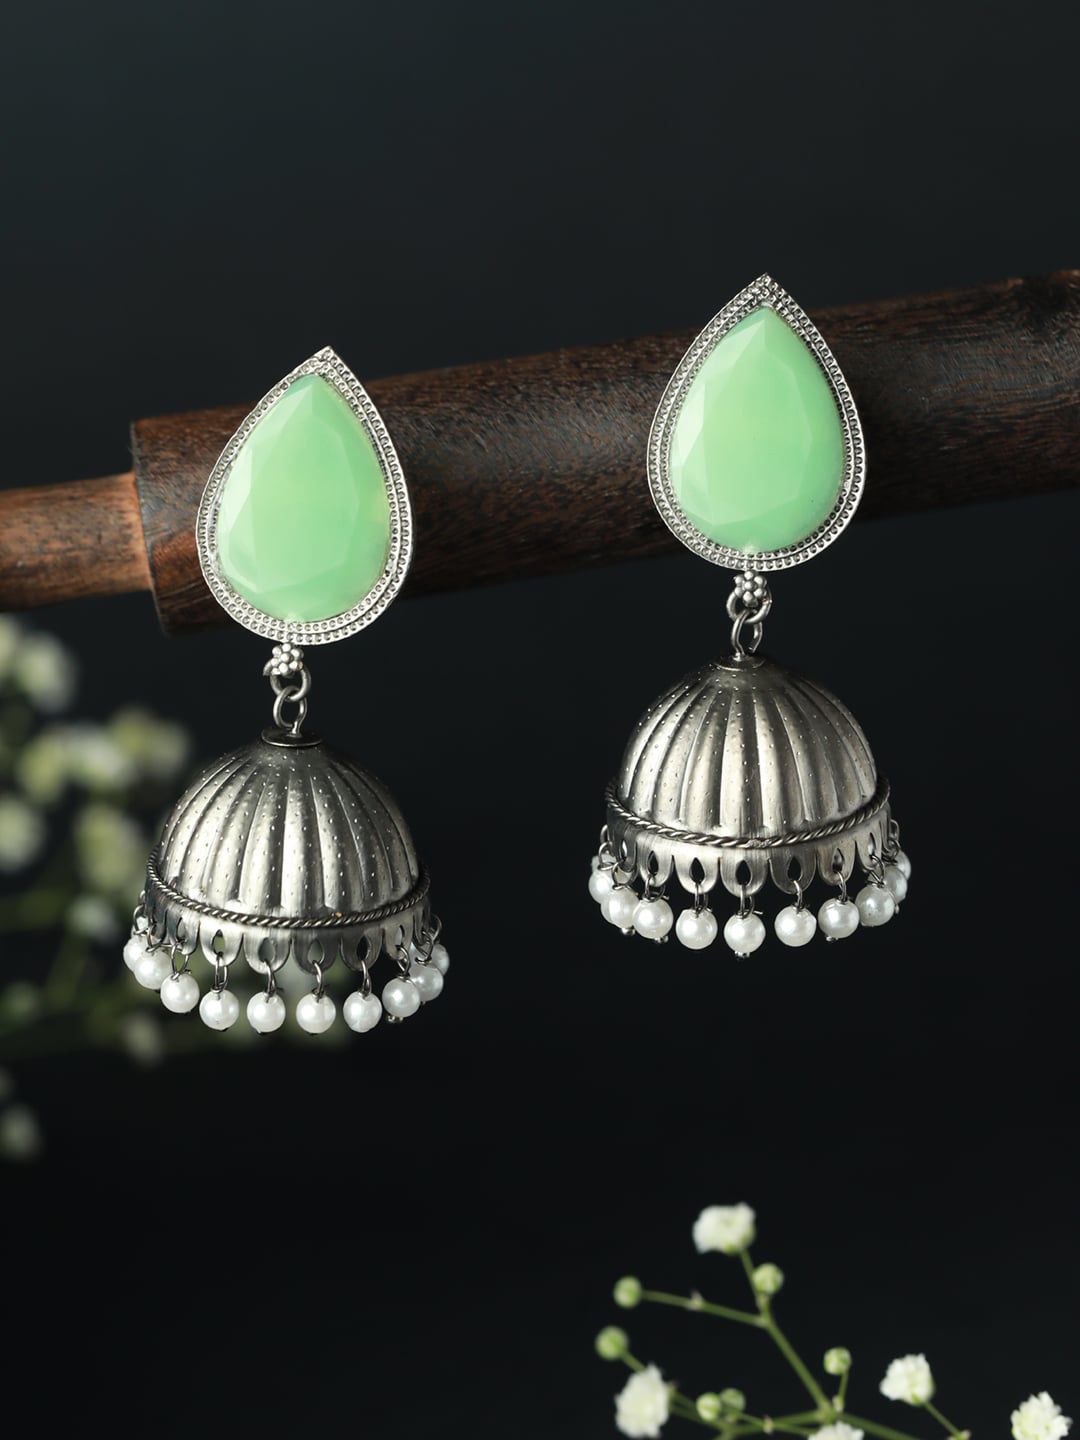 Priyaasi Oxidised Silver-Plated Mint Green Stone Studded Jhumkas Earrings Price in India